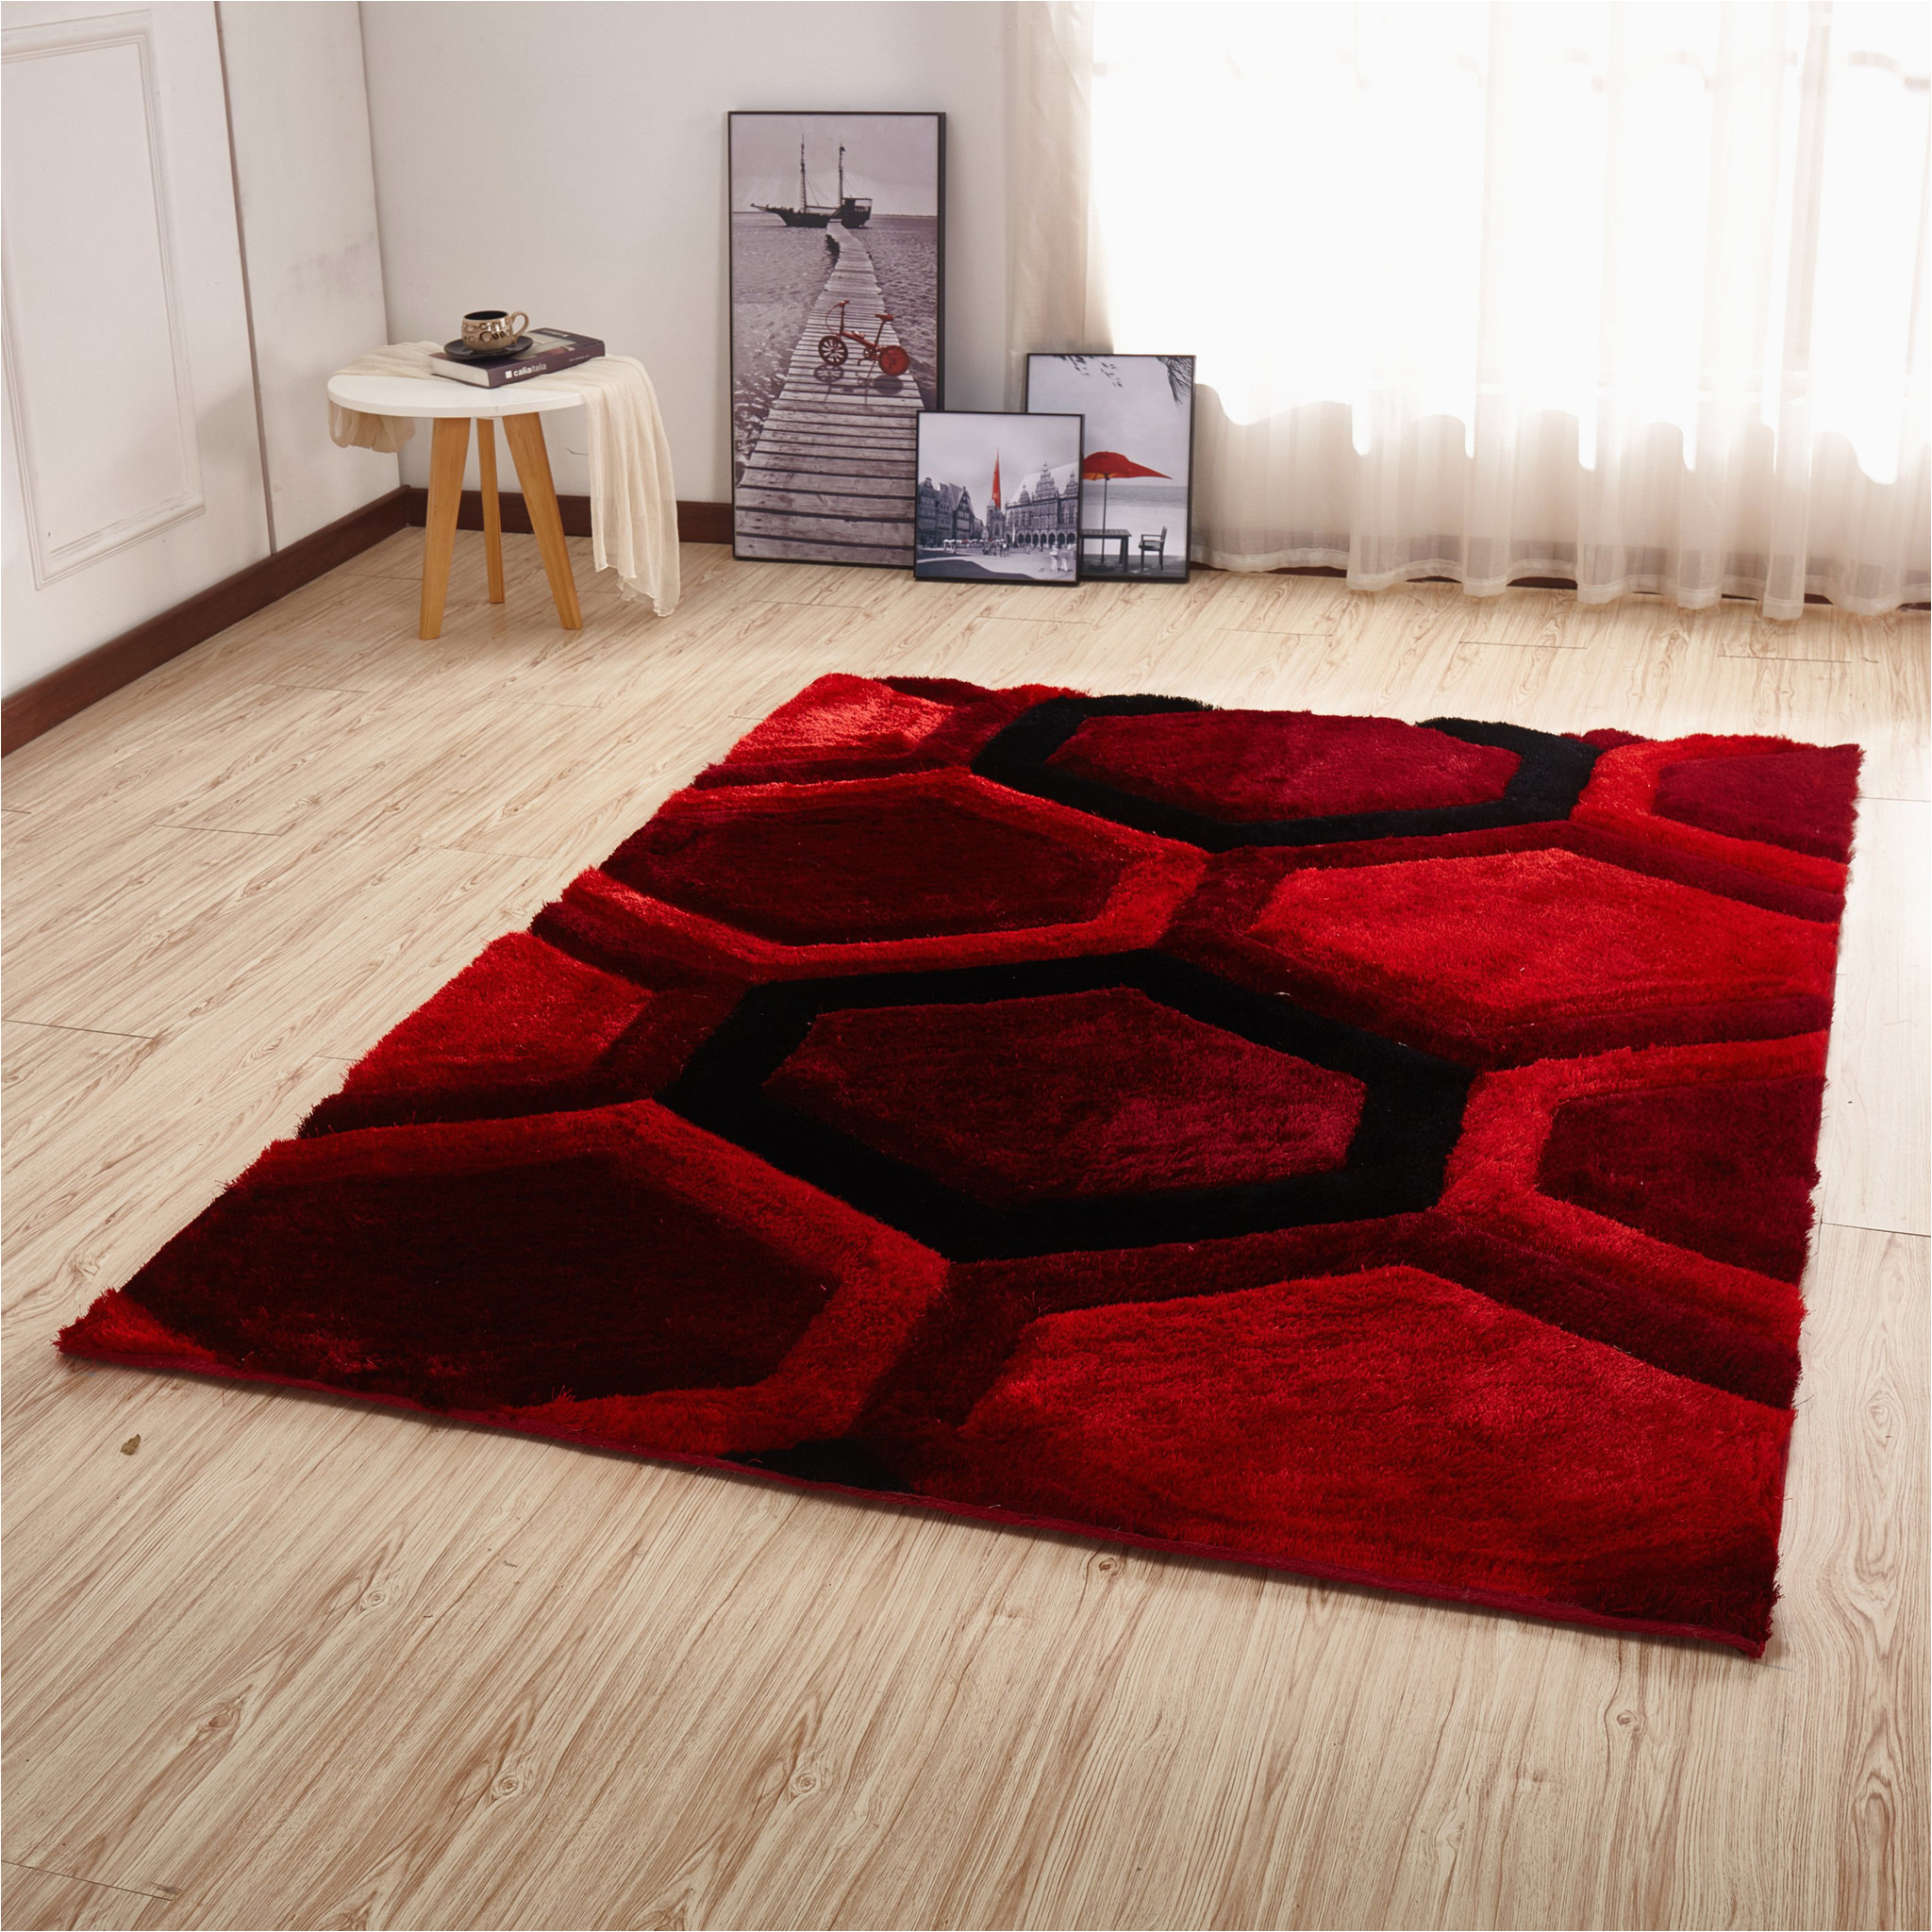 Area Rugs Black and Red Csr2143-5×7, Crown Shag-3d Red/black area Rug by Km Rugs